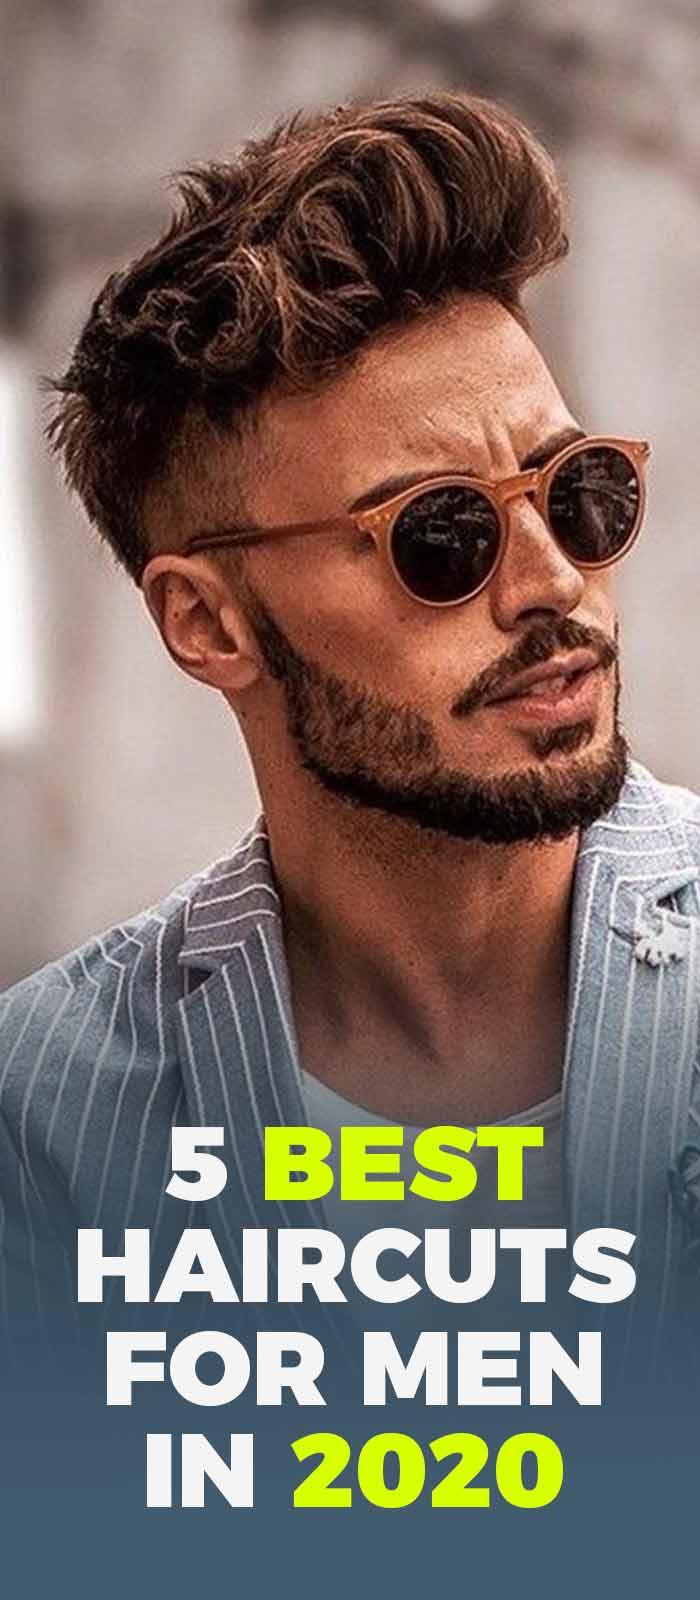 5 Best Haircuts For Men In 2020 Best Fashion Blog For Men